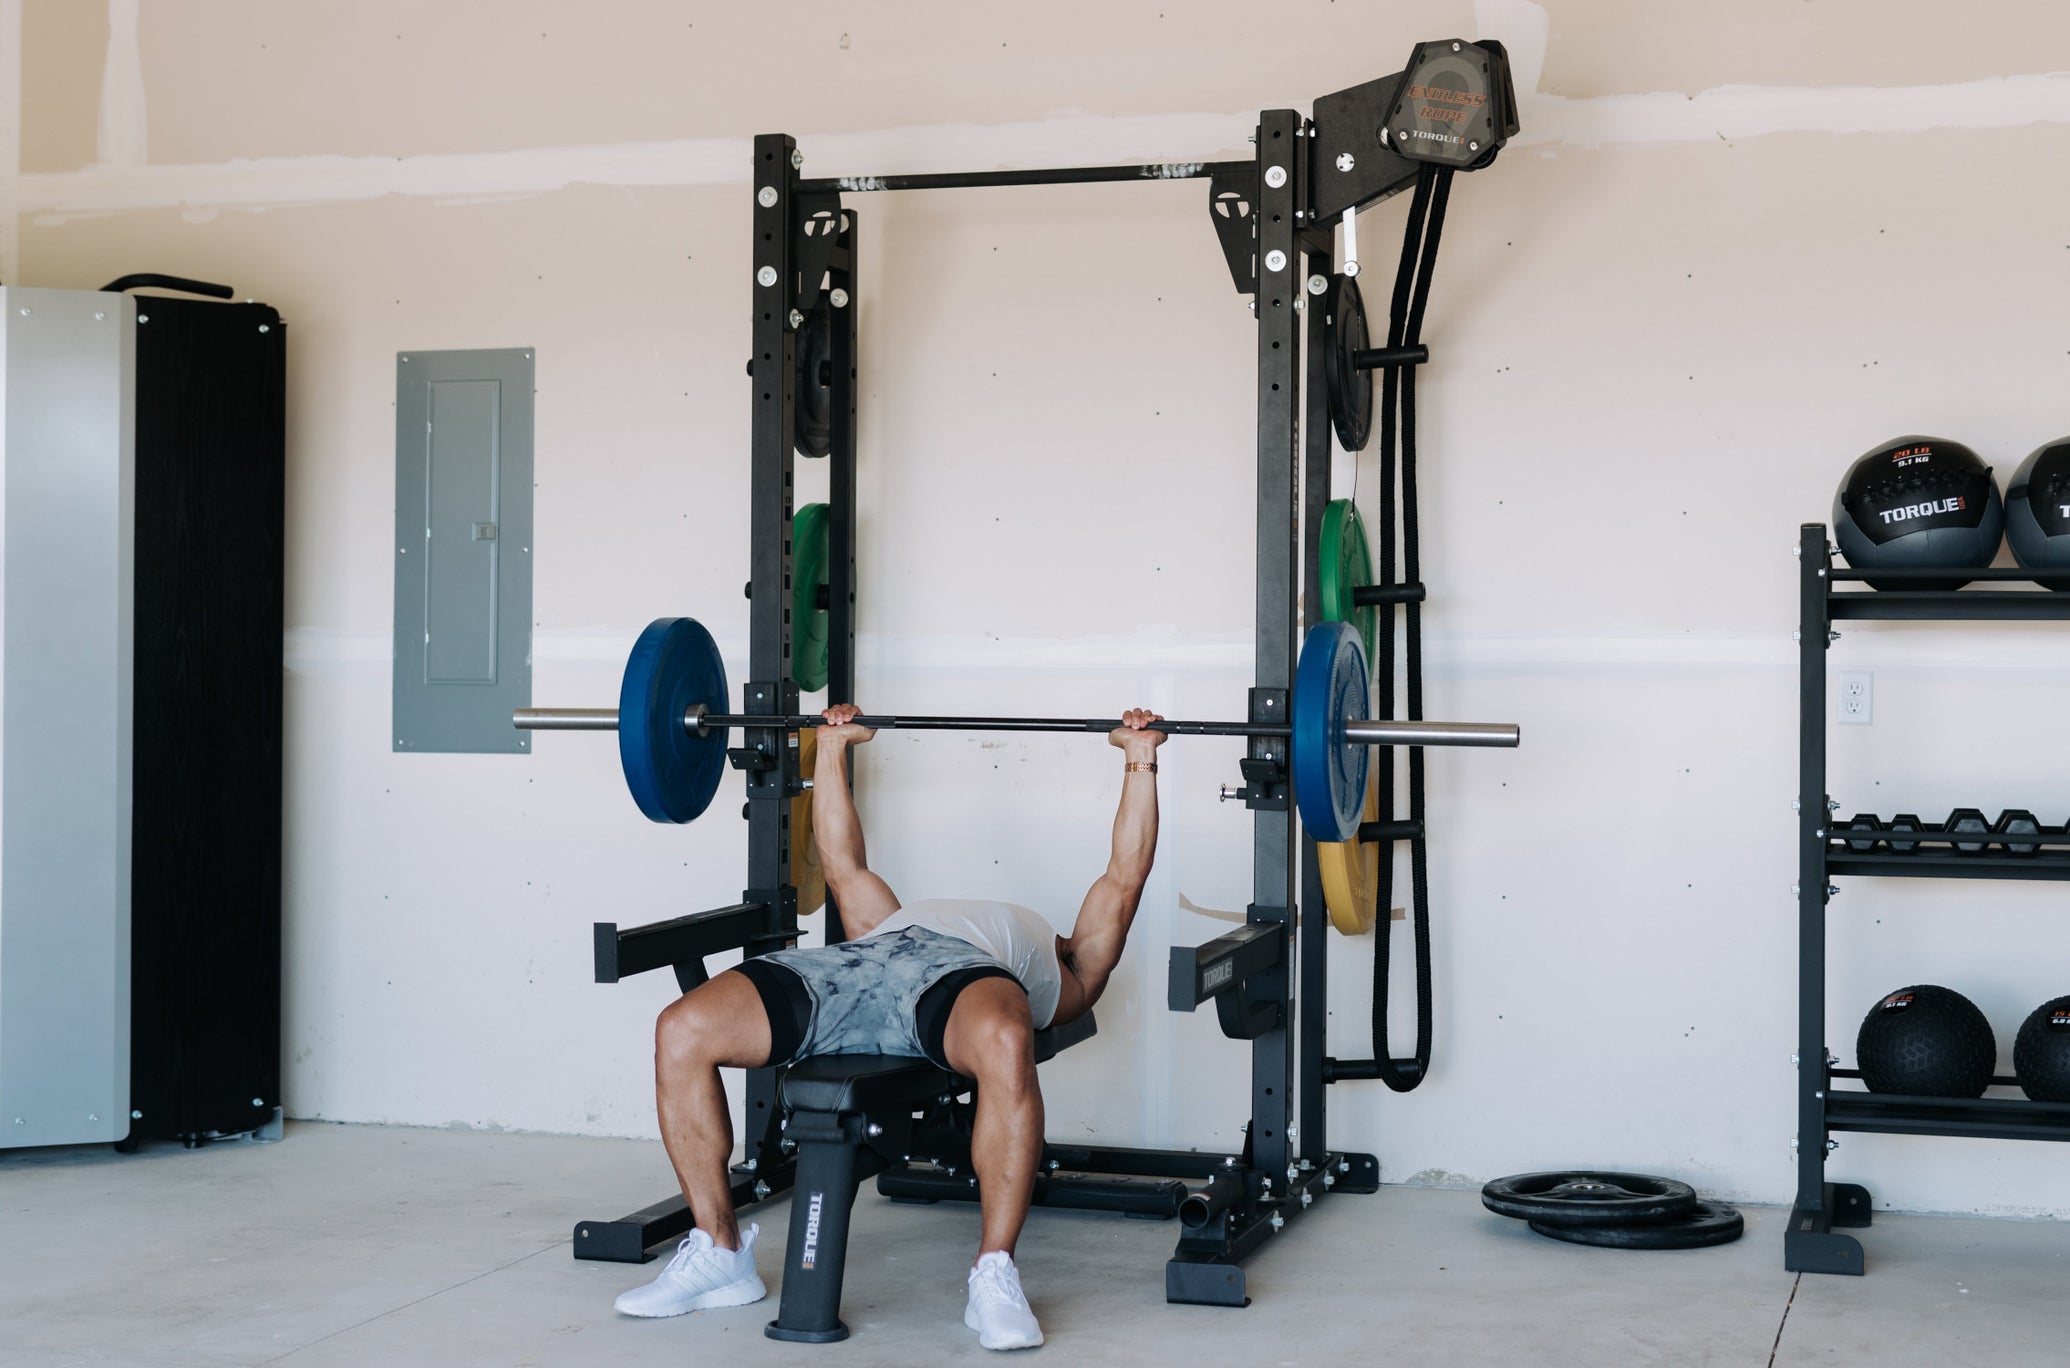 Man Lifting With Torque Equipment In Garage Gym